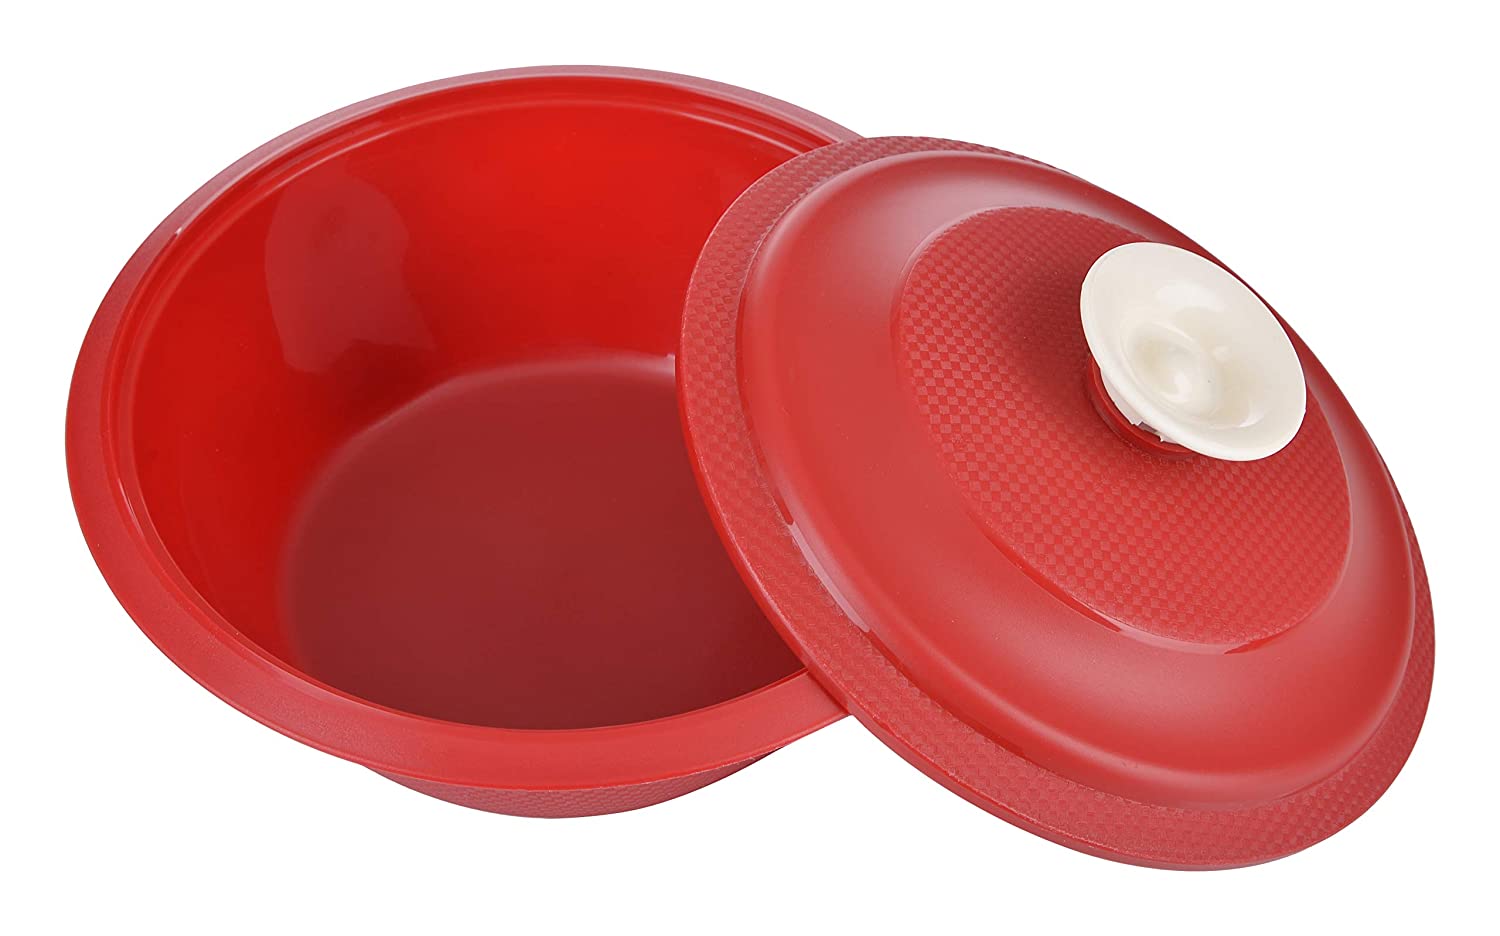 Cutting EDGE Plastic Big and Small Serveware (Red, 1100ml and 2200ml)